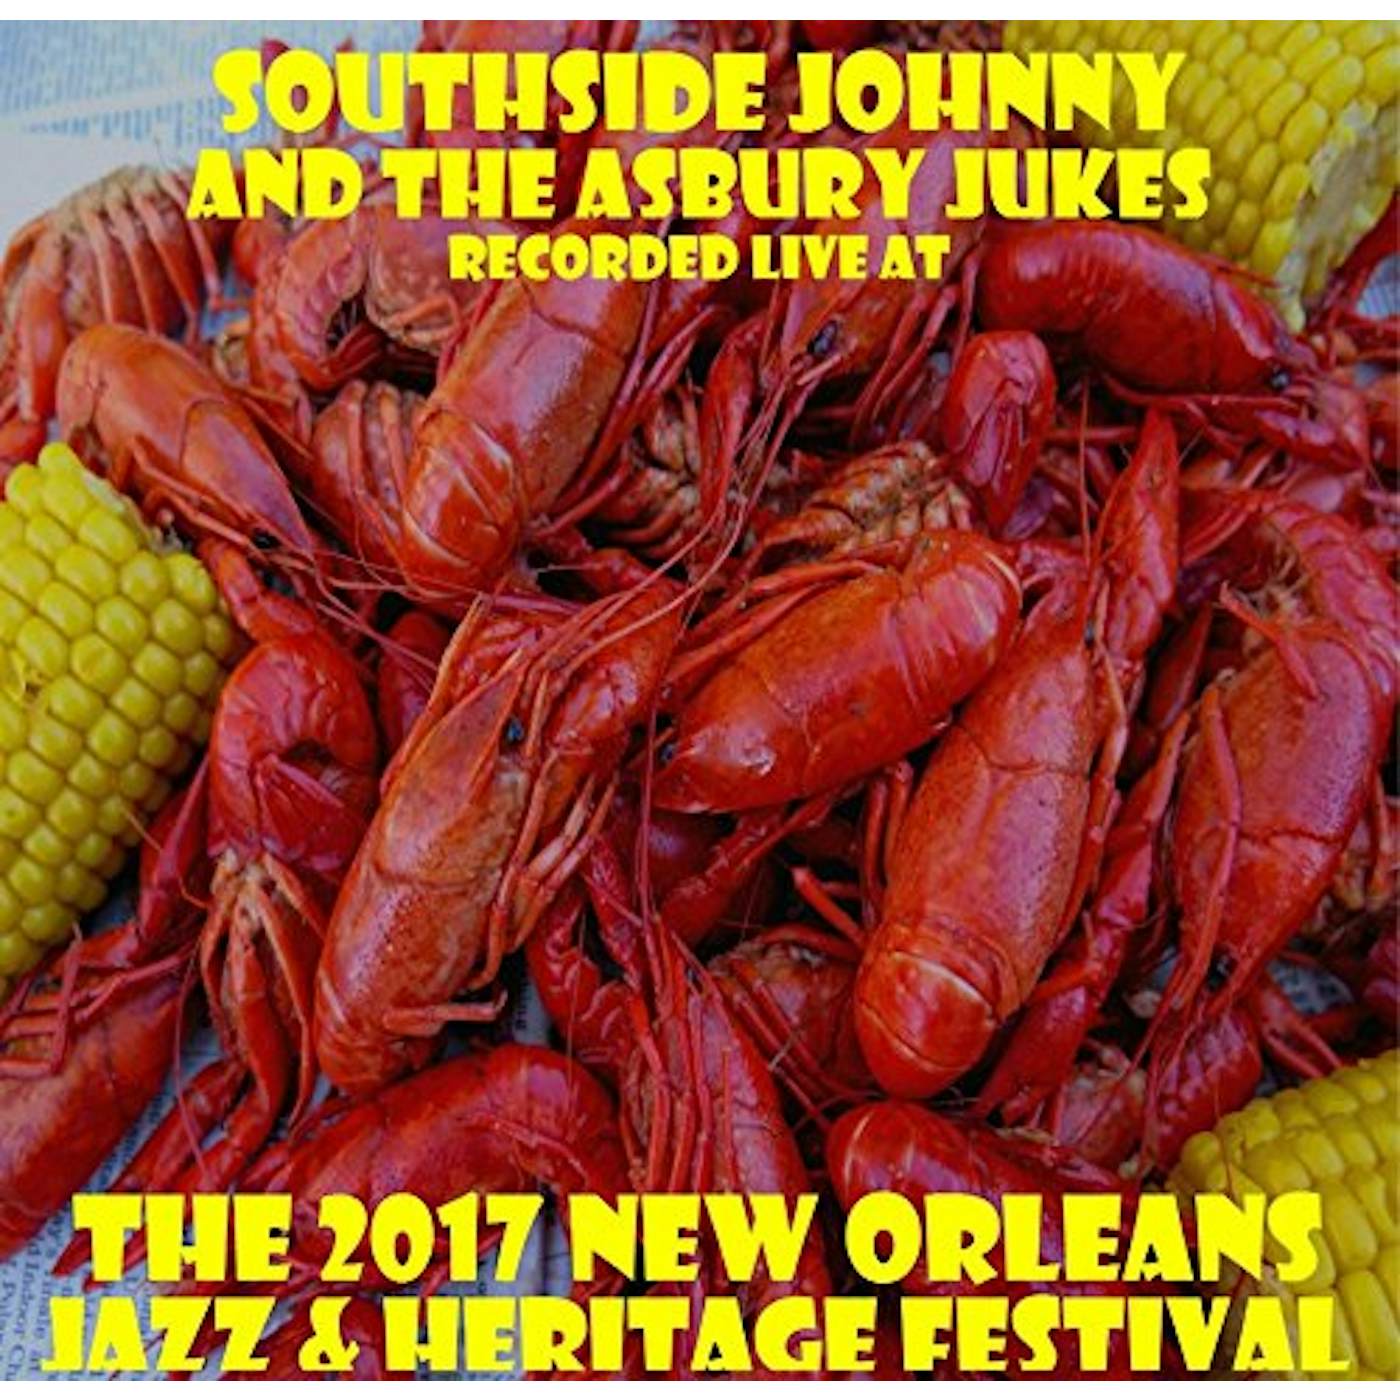 Southside Johnny And The Asbury Jukes LIVE AT JAZZFEST 2017 CD